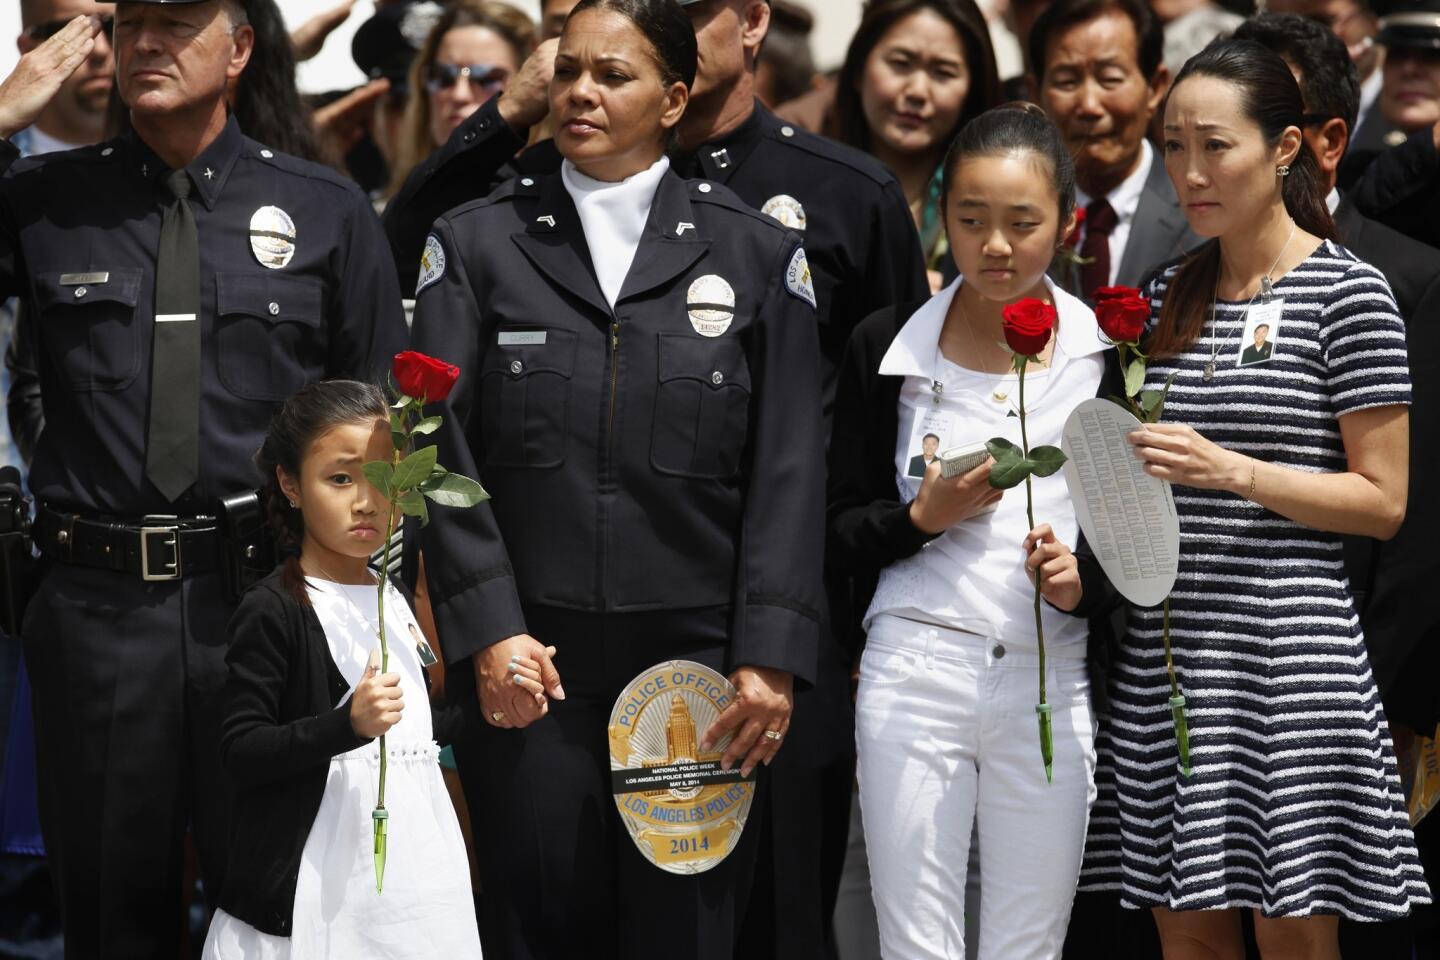 Kendall Lee, 6, left, holds a rose in one hand and the hand of LAPD officer Rosalind Curry with the other. Kendall's father, LAPD Officer Nicholas Lee, was killed this year. At right are Jalen Lee, 11, his other daughter, and Cathy Lee, his widow.